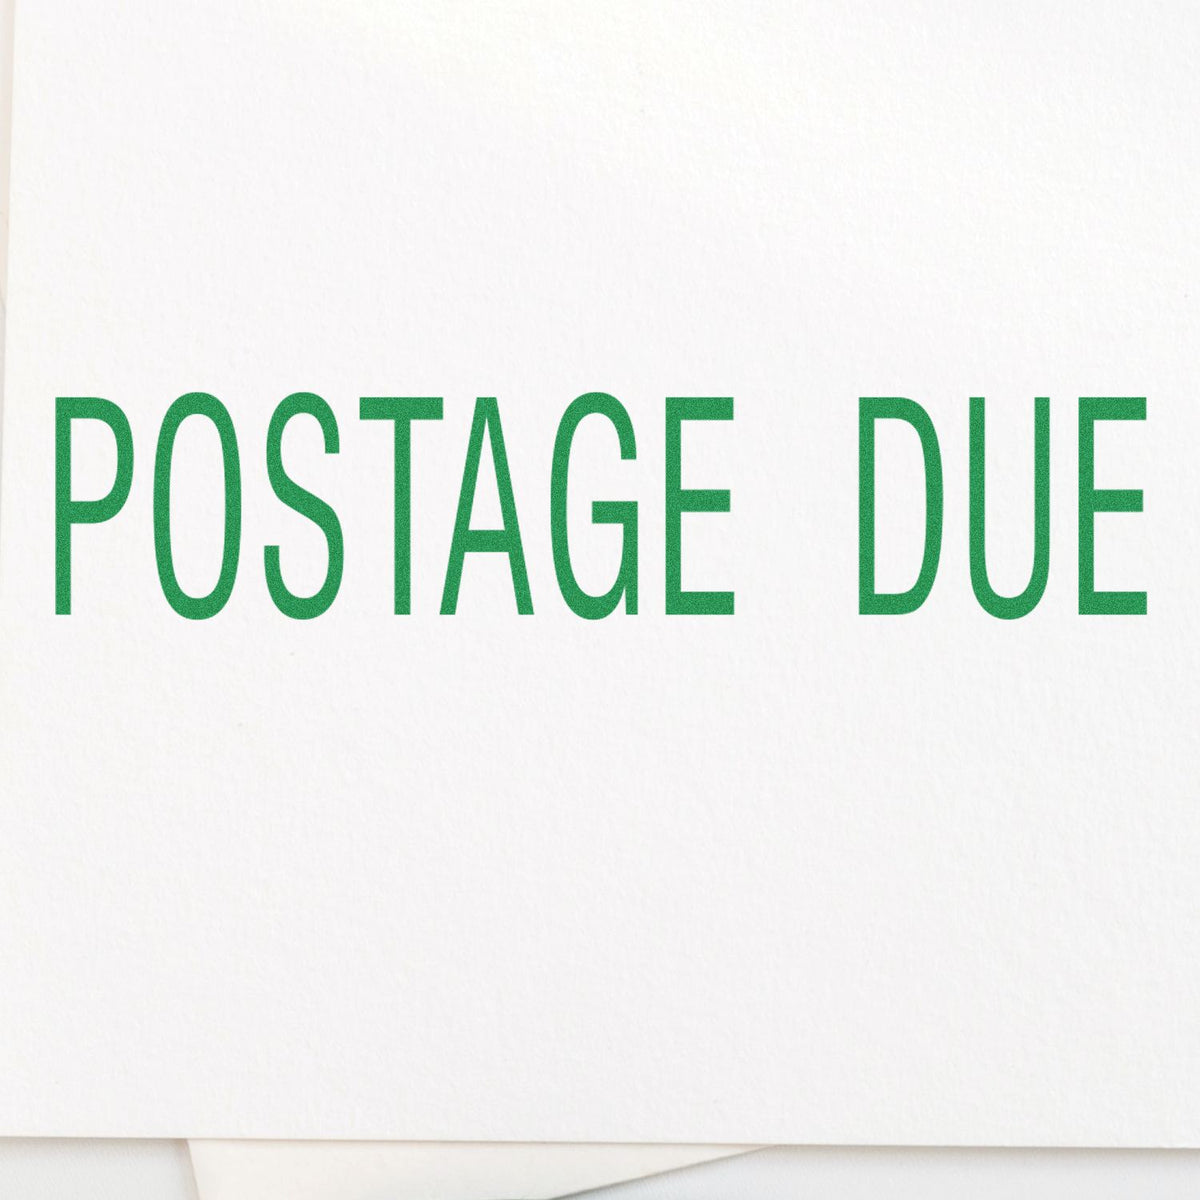 Postage Due Rubber Stamp In Use